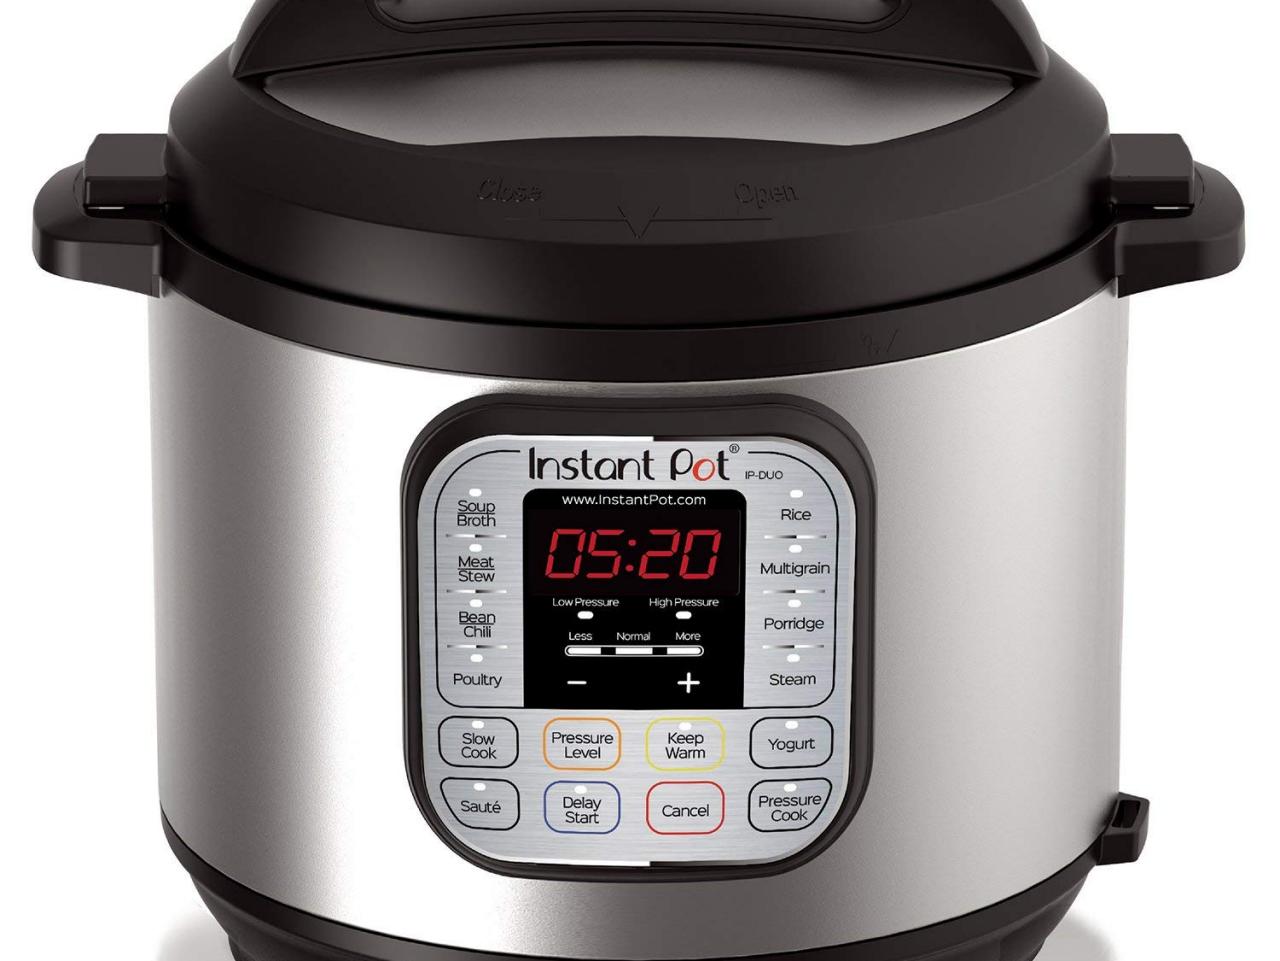 https://food.fnr.sndimg.com/content/dam/images/food/products/2019/5/13/rx_instant-pot-duo60-6-qt-7-in-1-multi-use-programmable-pressure-cooker.jpeg.rend.hgtvcom.1280.960.suffix/1557758578923.jpeg